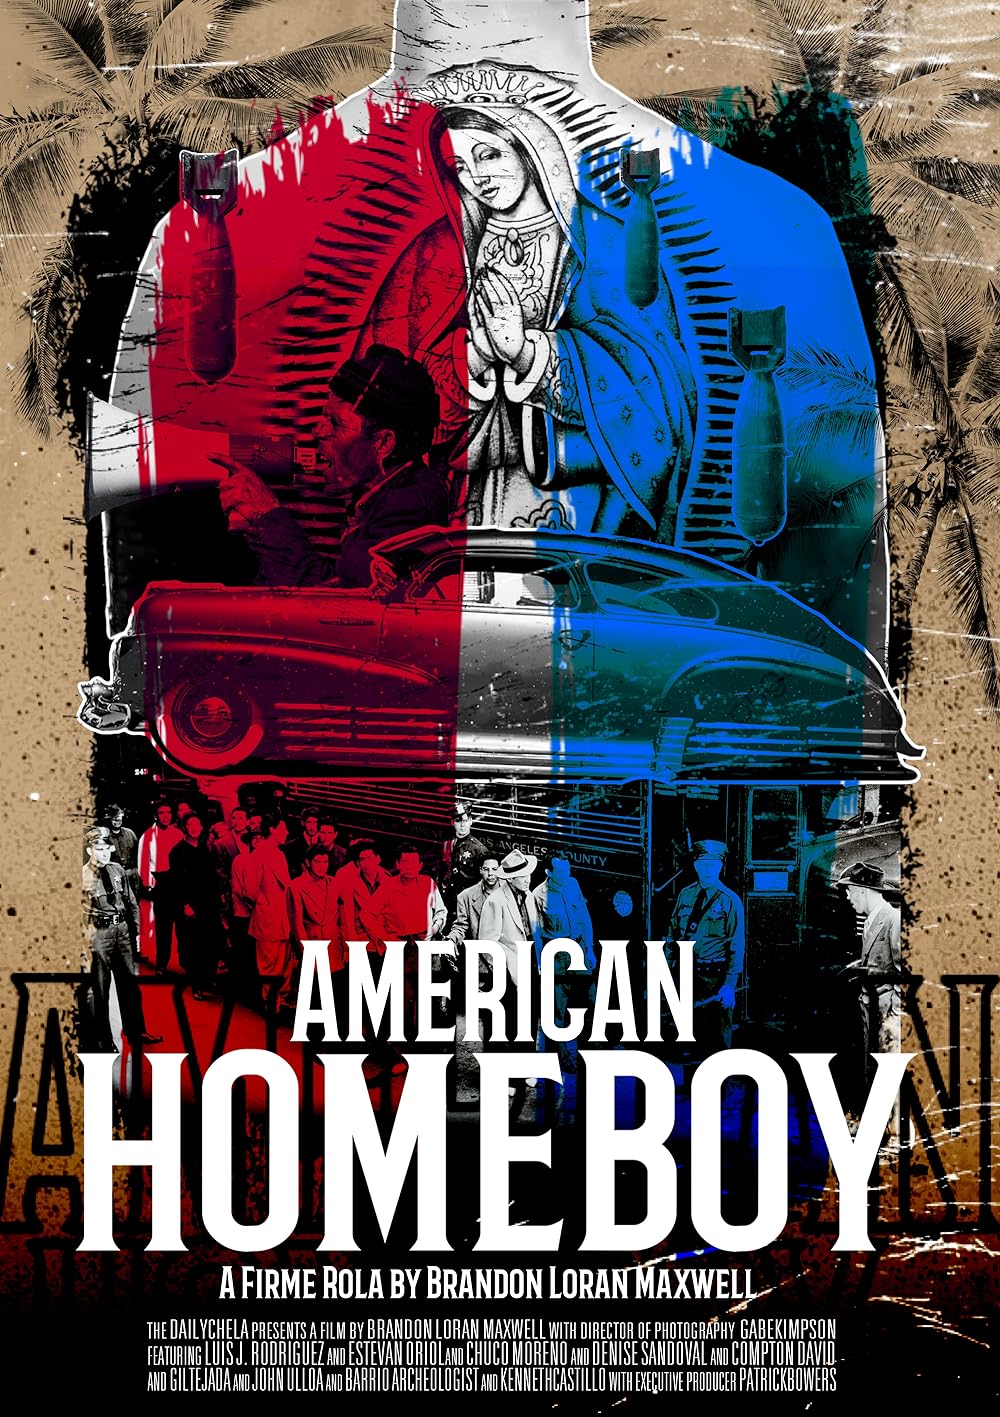 Discussing The Documentary, American Homeboy